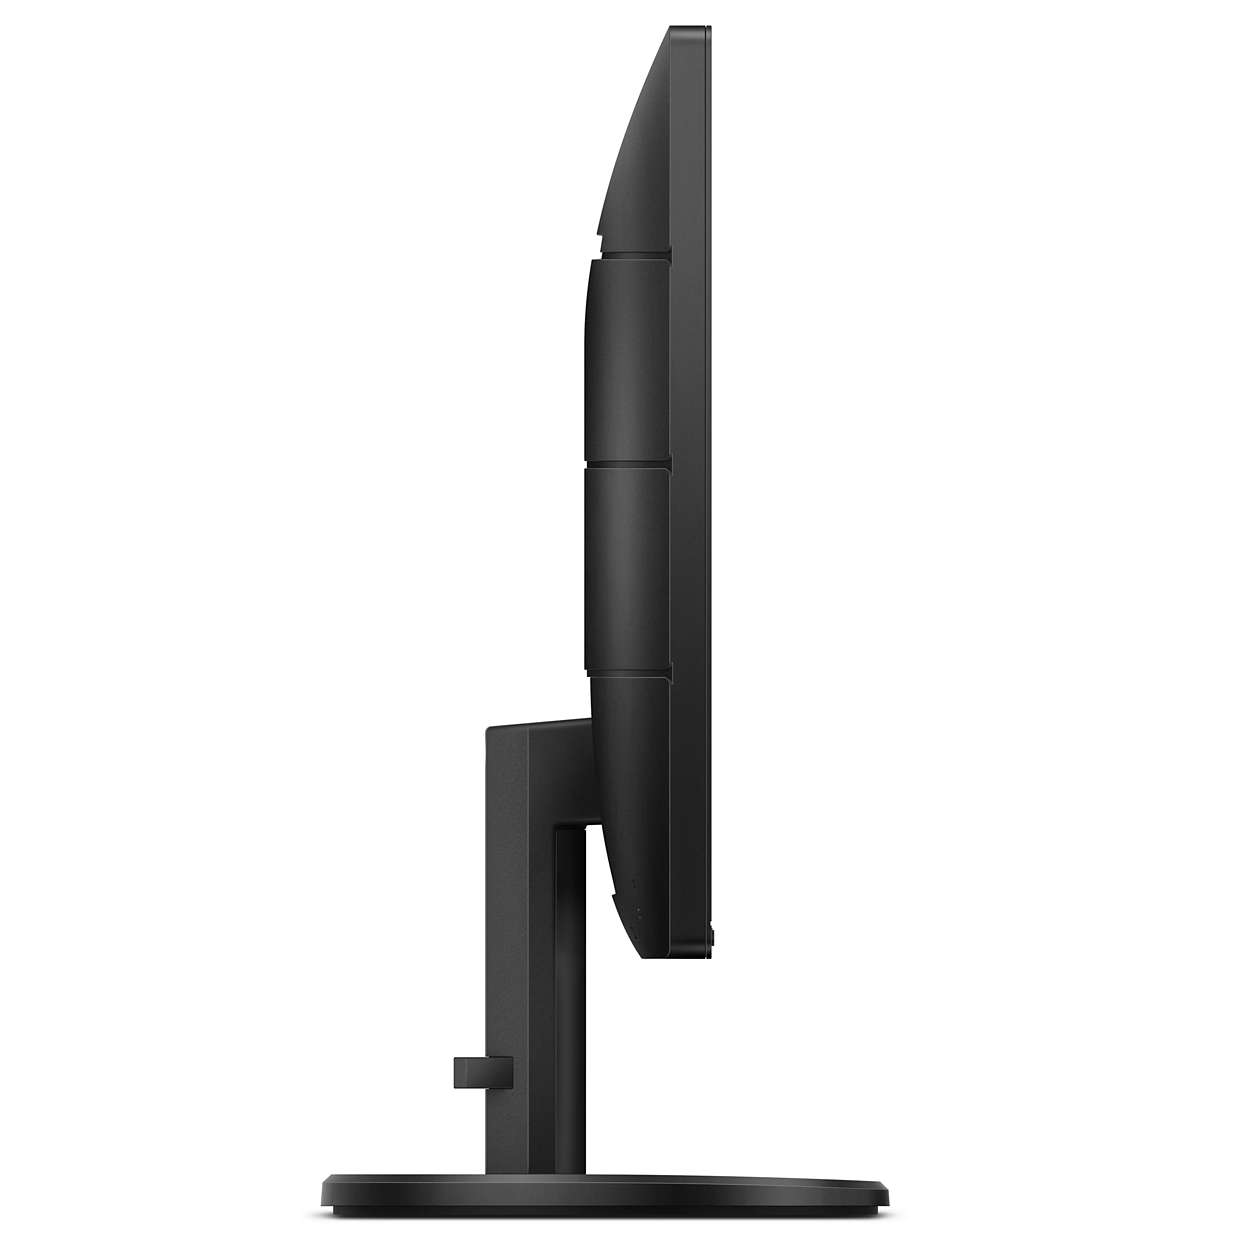 Sturdy On the head of Our company Monitor LCD 221S8LDAB/00 | Philips